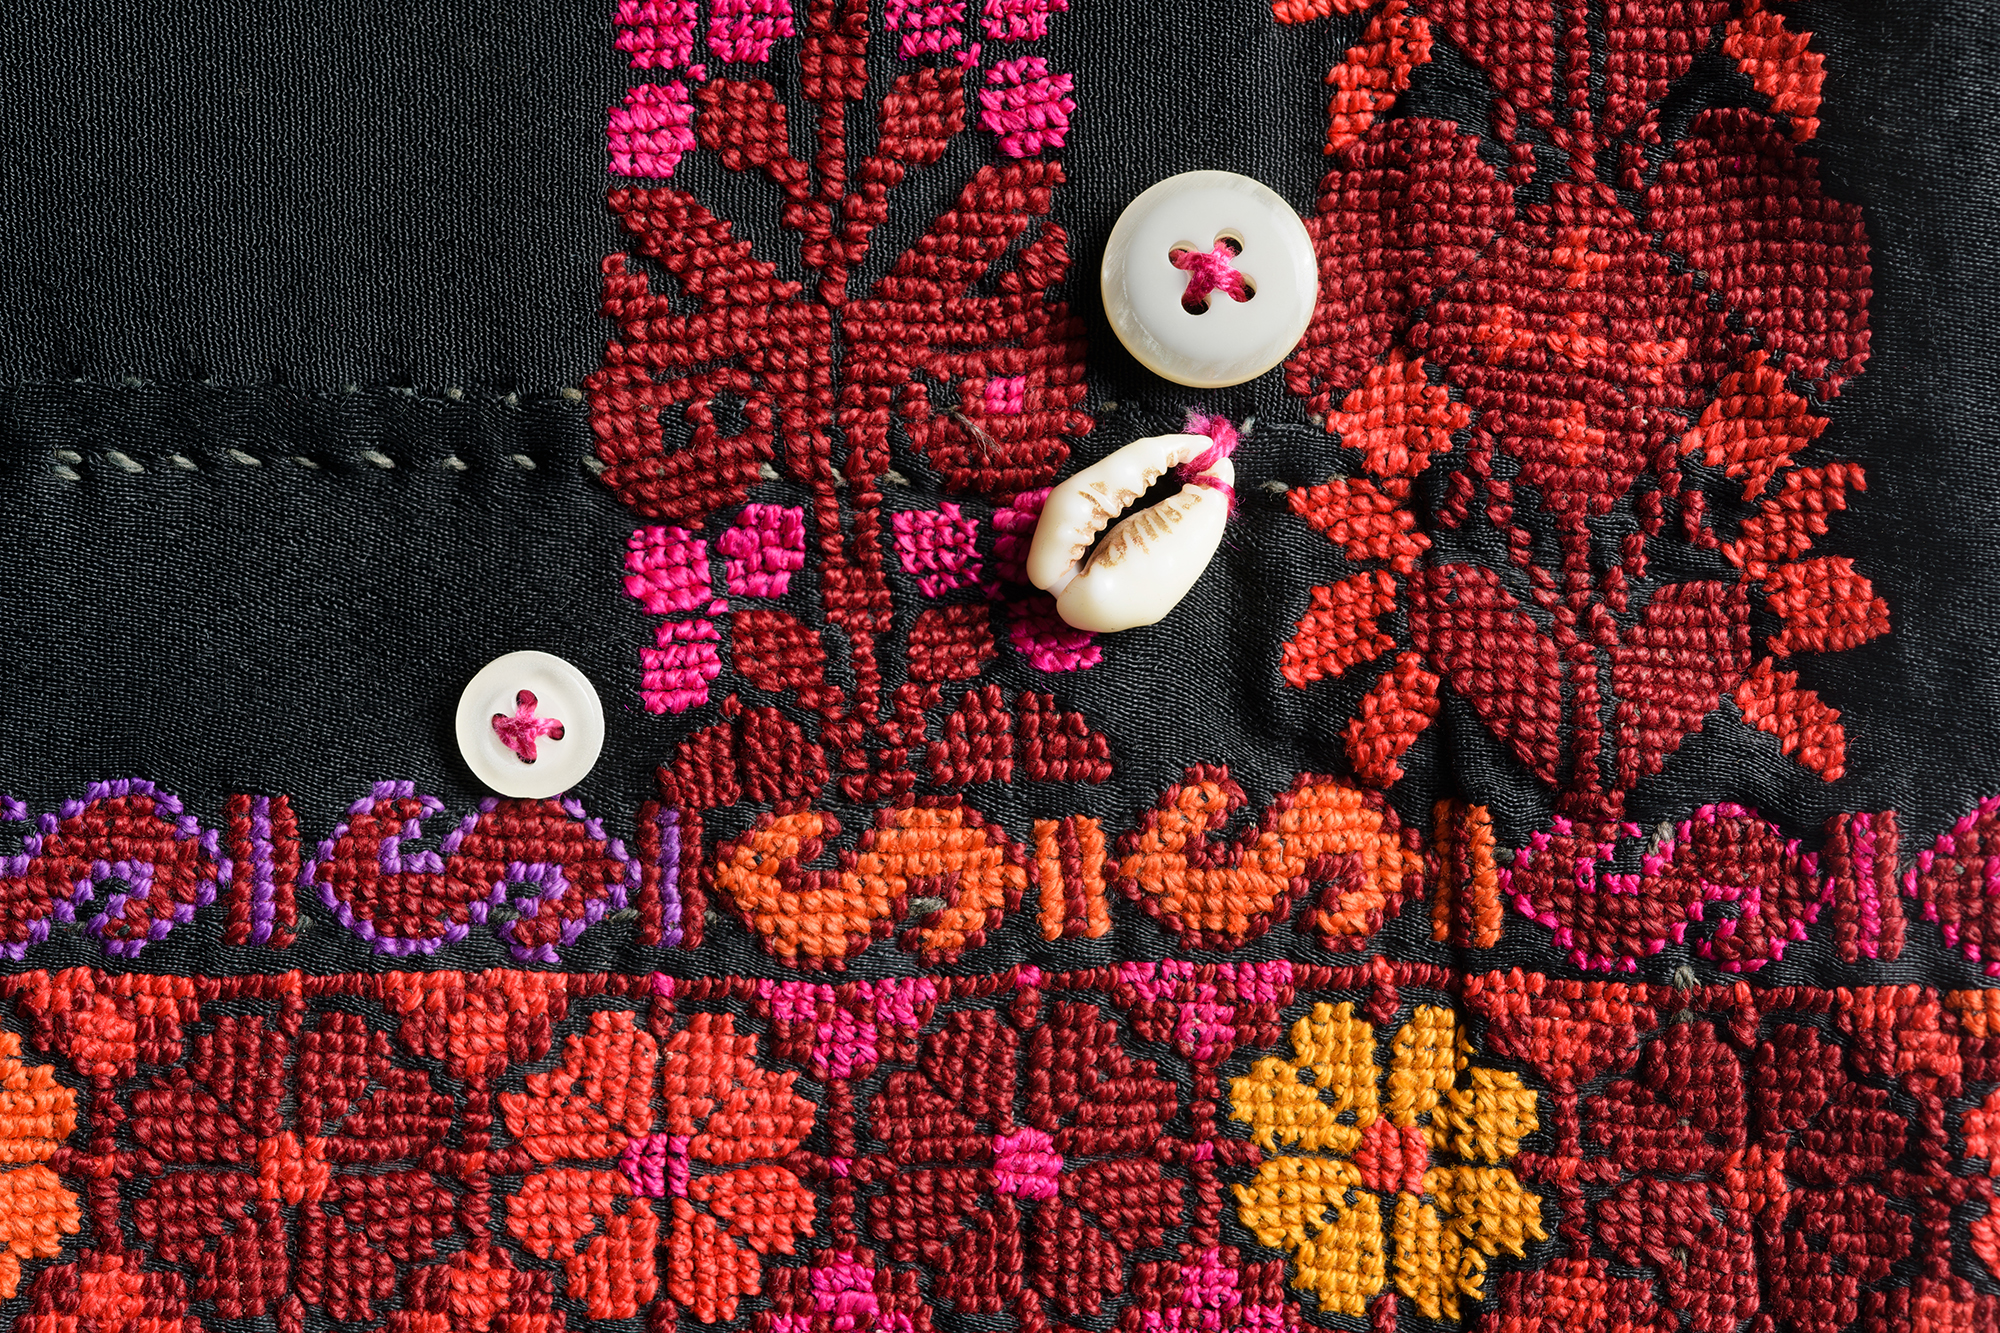 Close-up of buttons and cowry shells that decorate a colorfully embroidered women's jacket. Region of origin: Negev, 1950s.